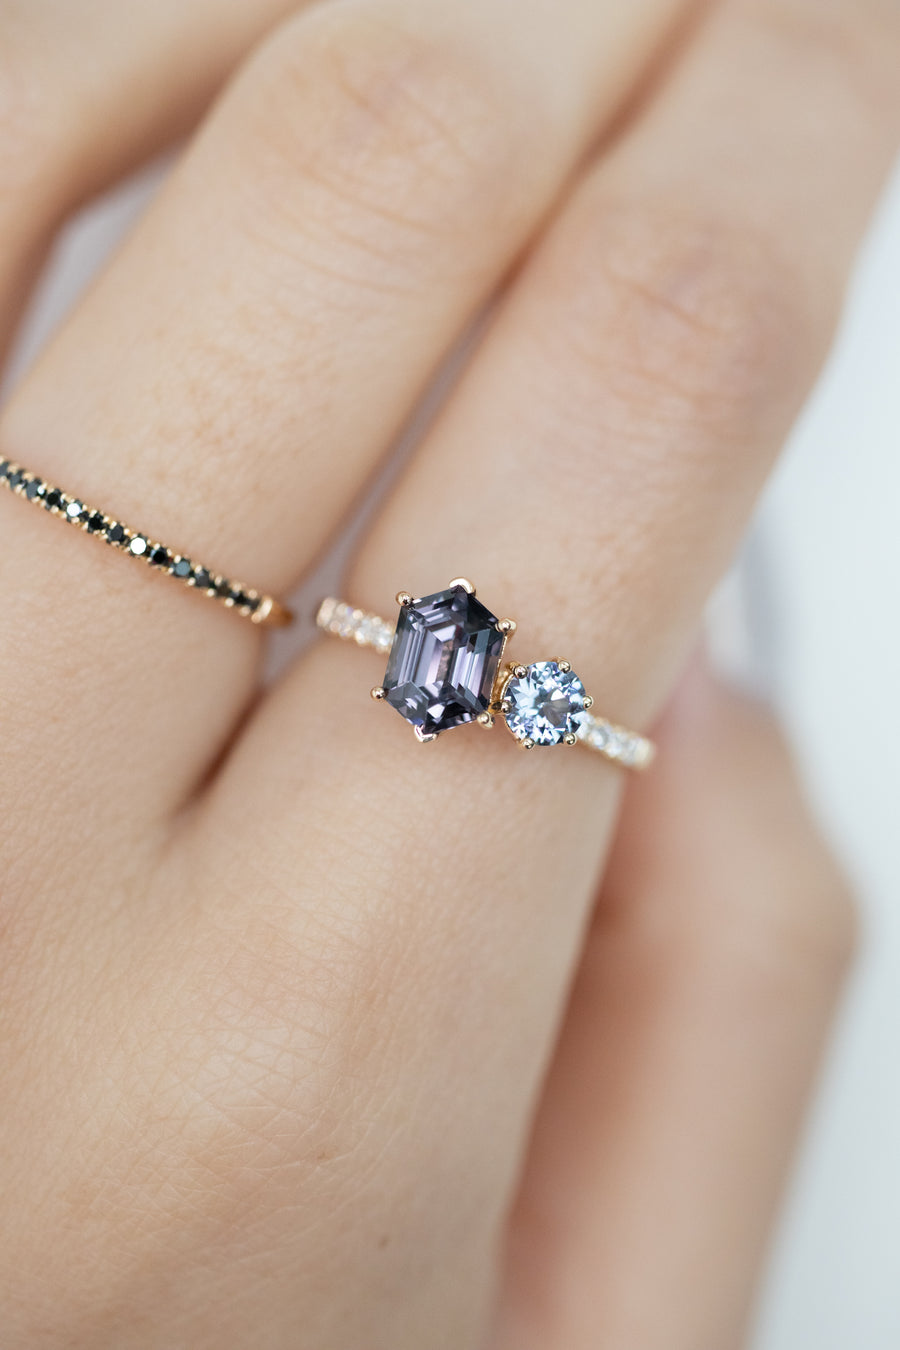 ~1.08ct Hexagon Greyish Purple Spinel with Lavender Round Spinel & 0.08ct Diamonds 18K Yellow Gold Ring